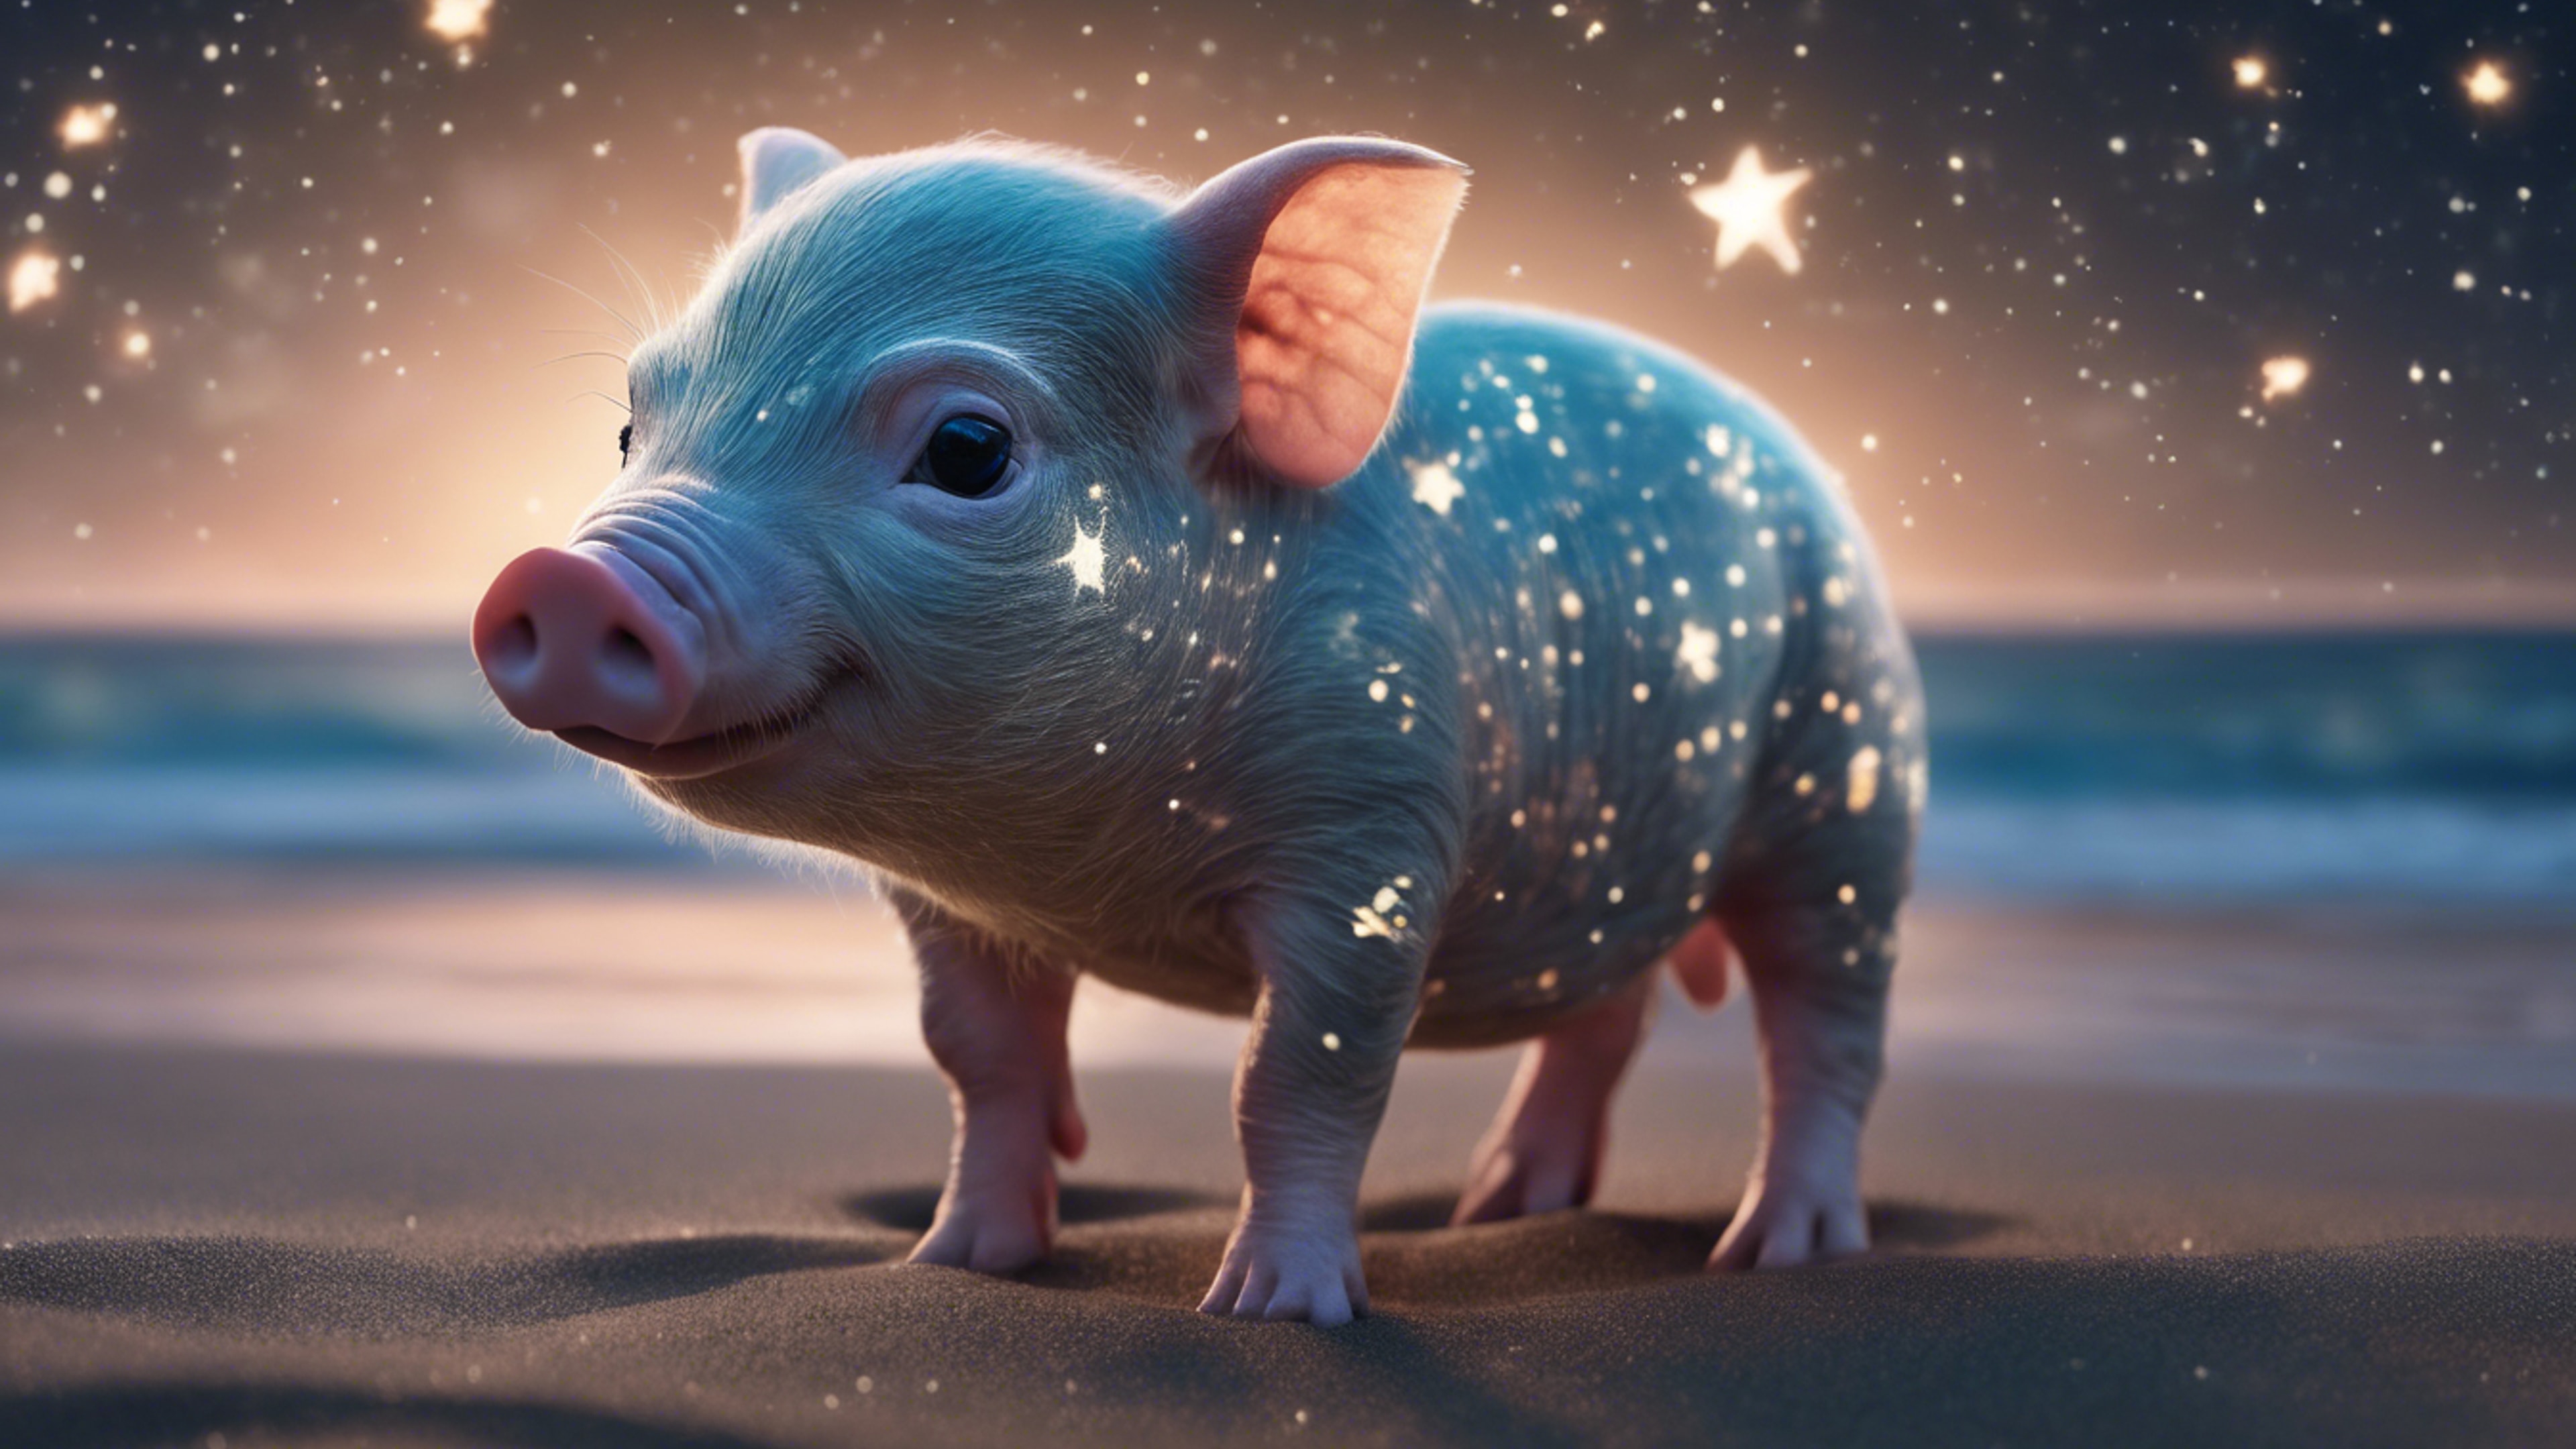 An unique digital rendering of a bioluminescent piglet on a calm beach under starry night sky. טפט[597018af159c4f7fa895]